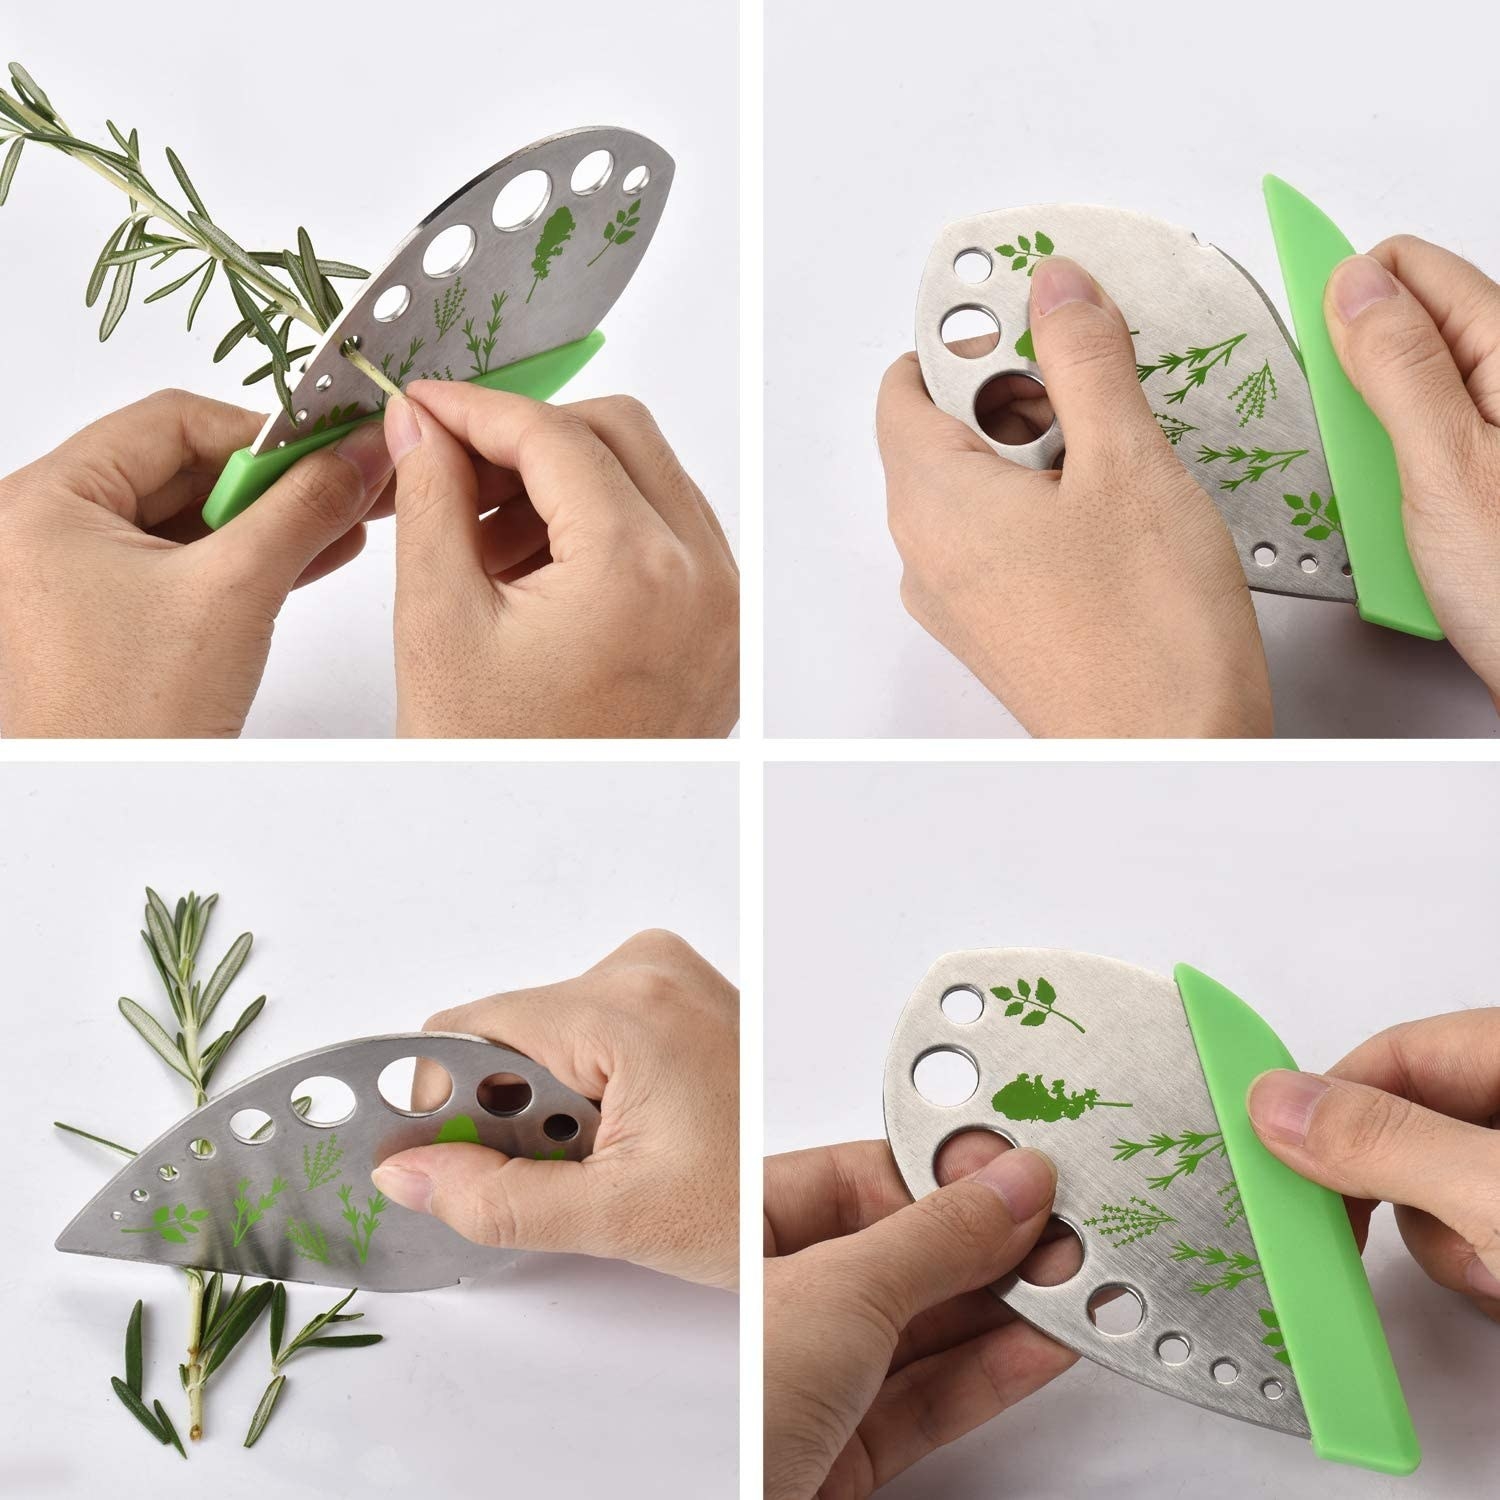 A series of our images with the different ways to pull leaves and chop them with a single tool